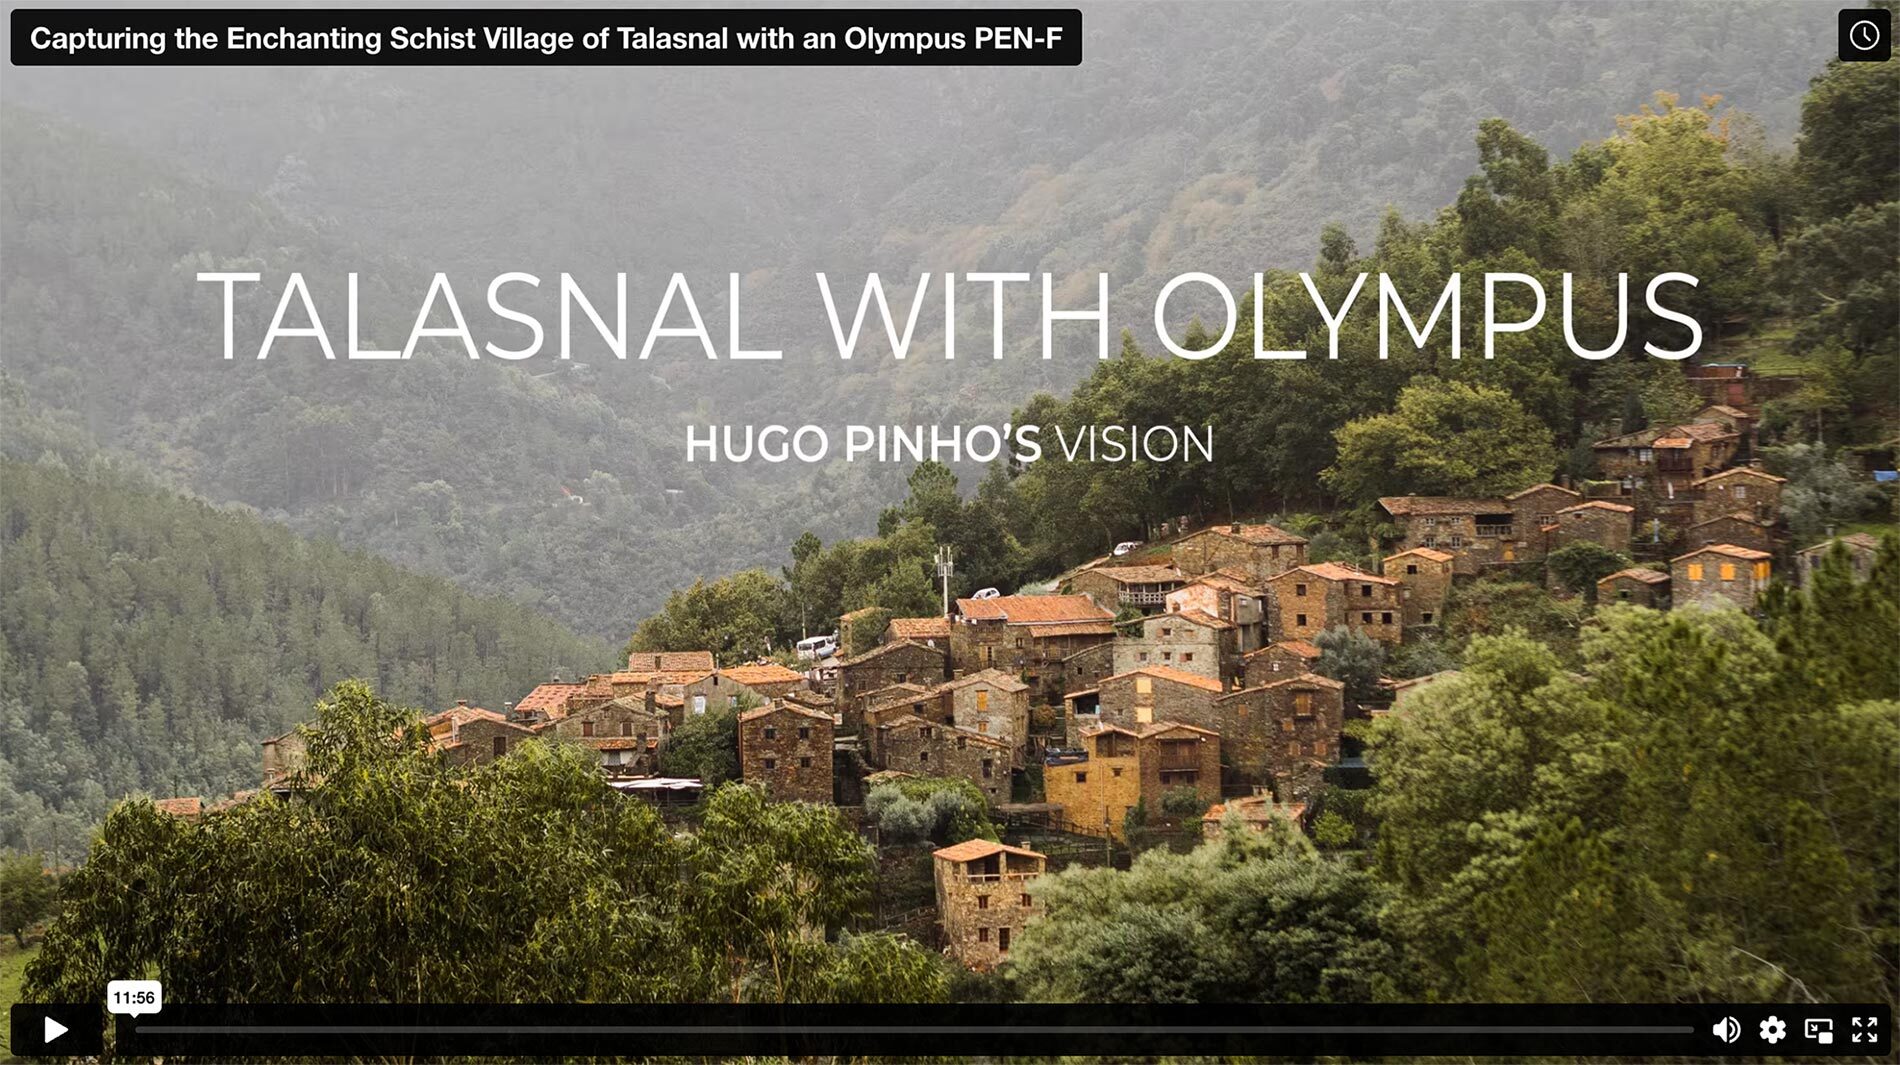 Premium/ Capturing the Enchanting Schist Village of Talasnal with an Olympus PEN-F